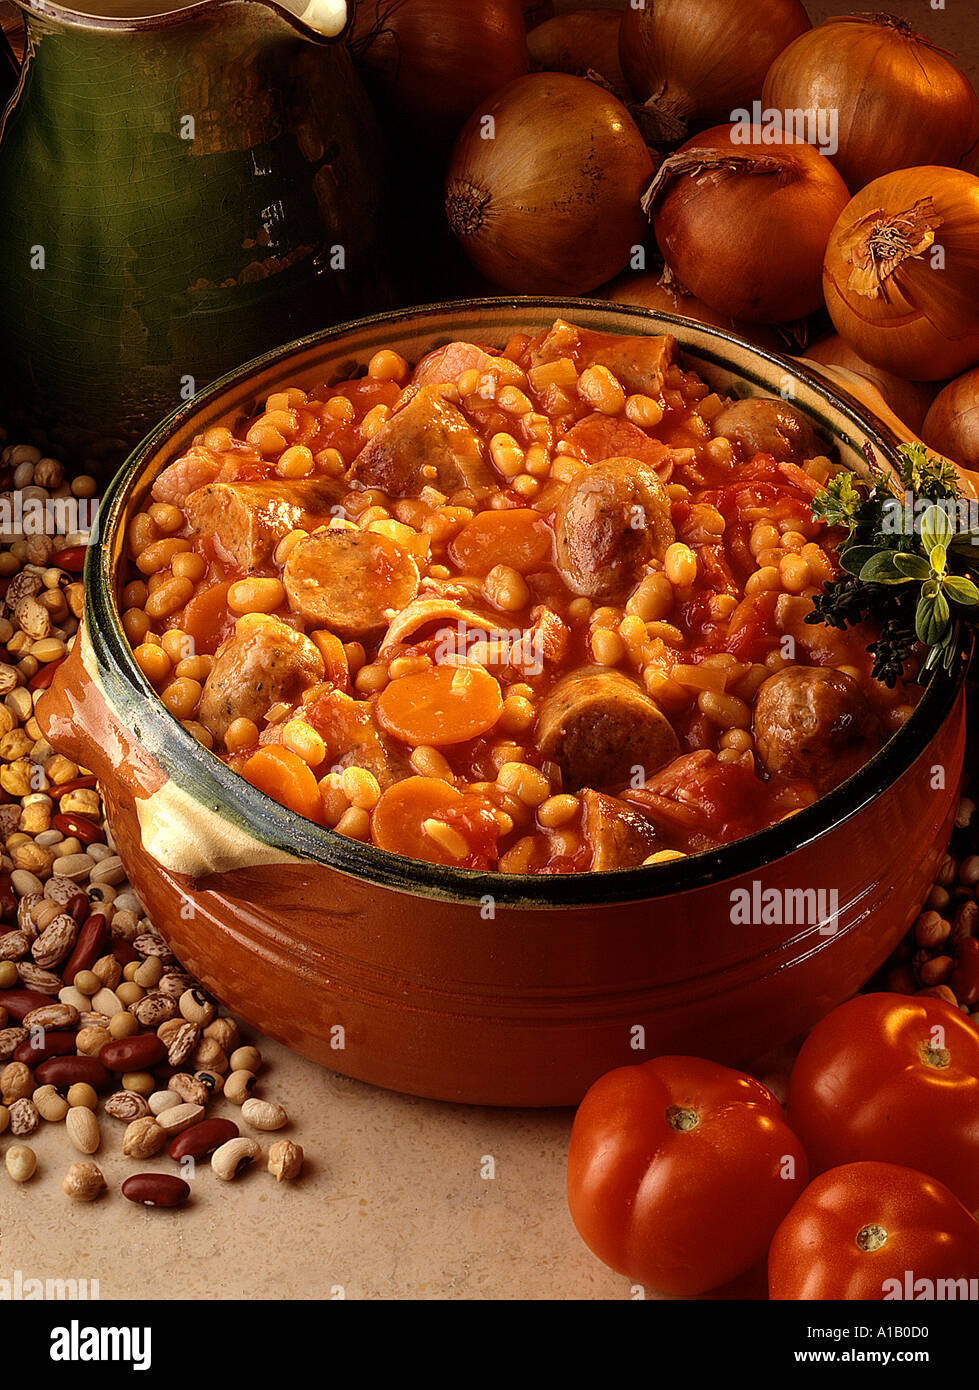 TRADITIONAL PORK AND BEAN CASSEROLE Stock Photo